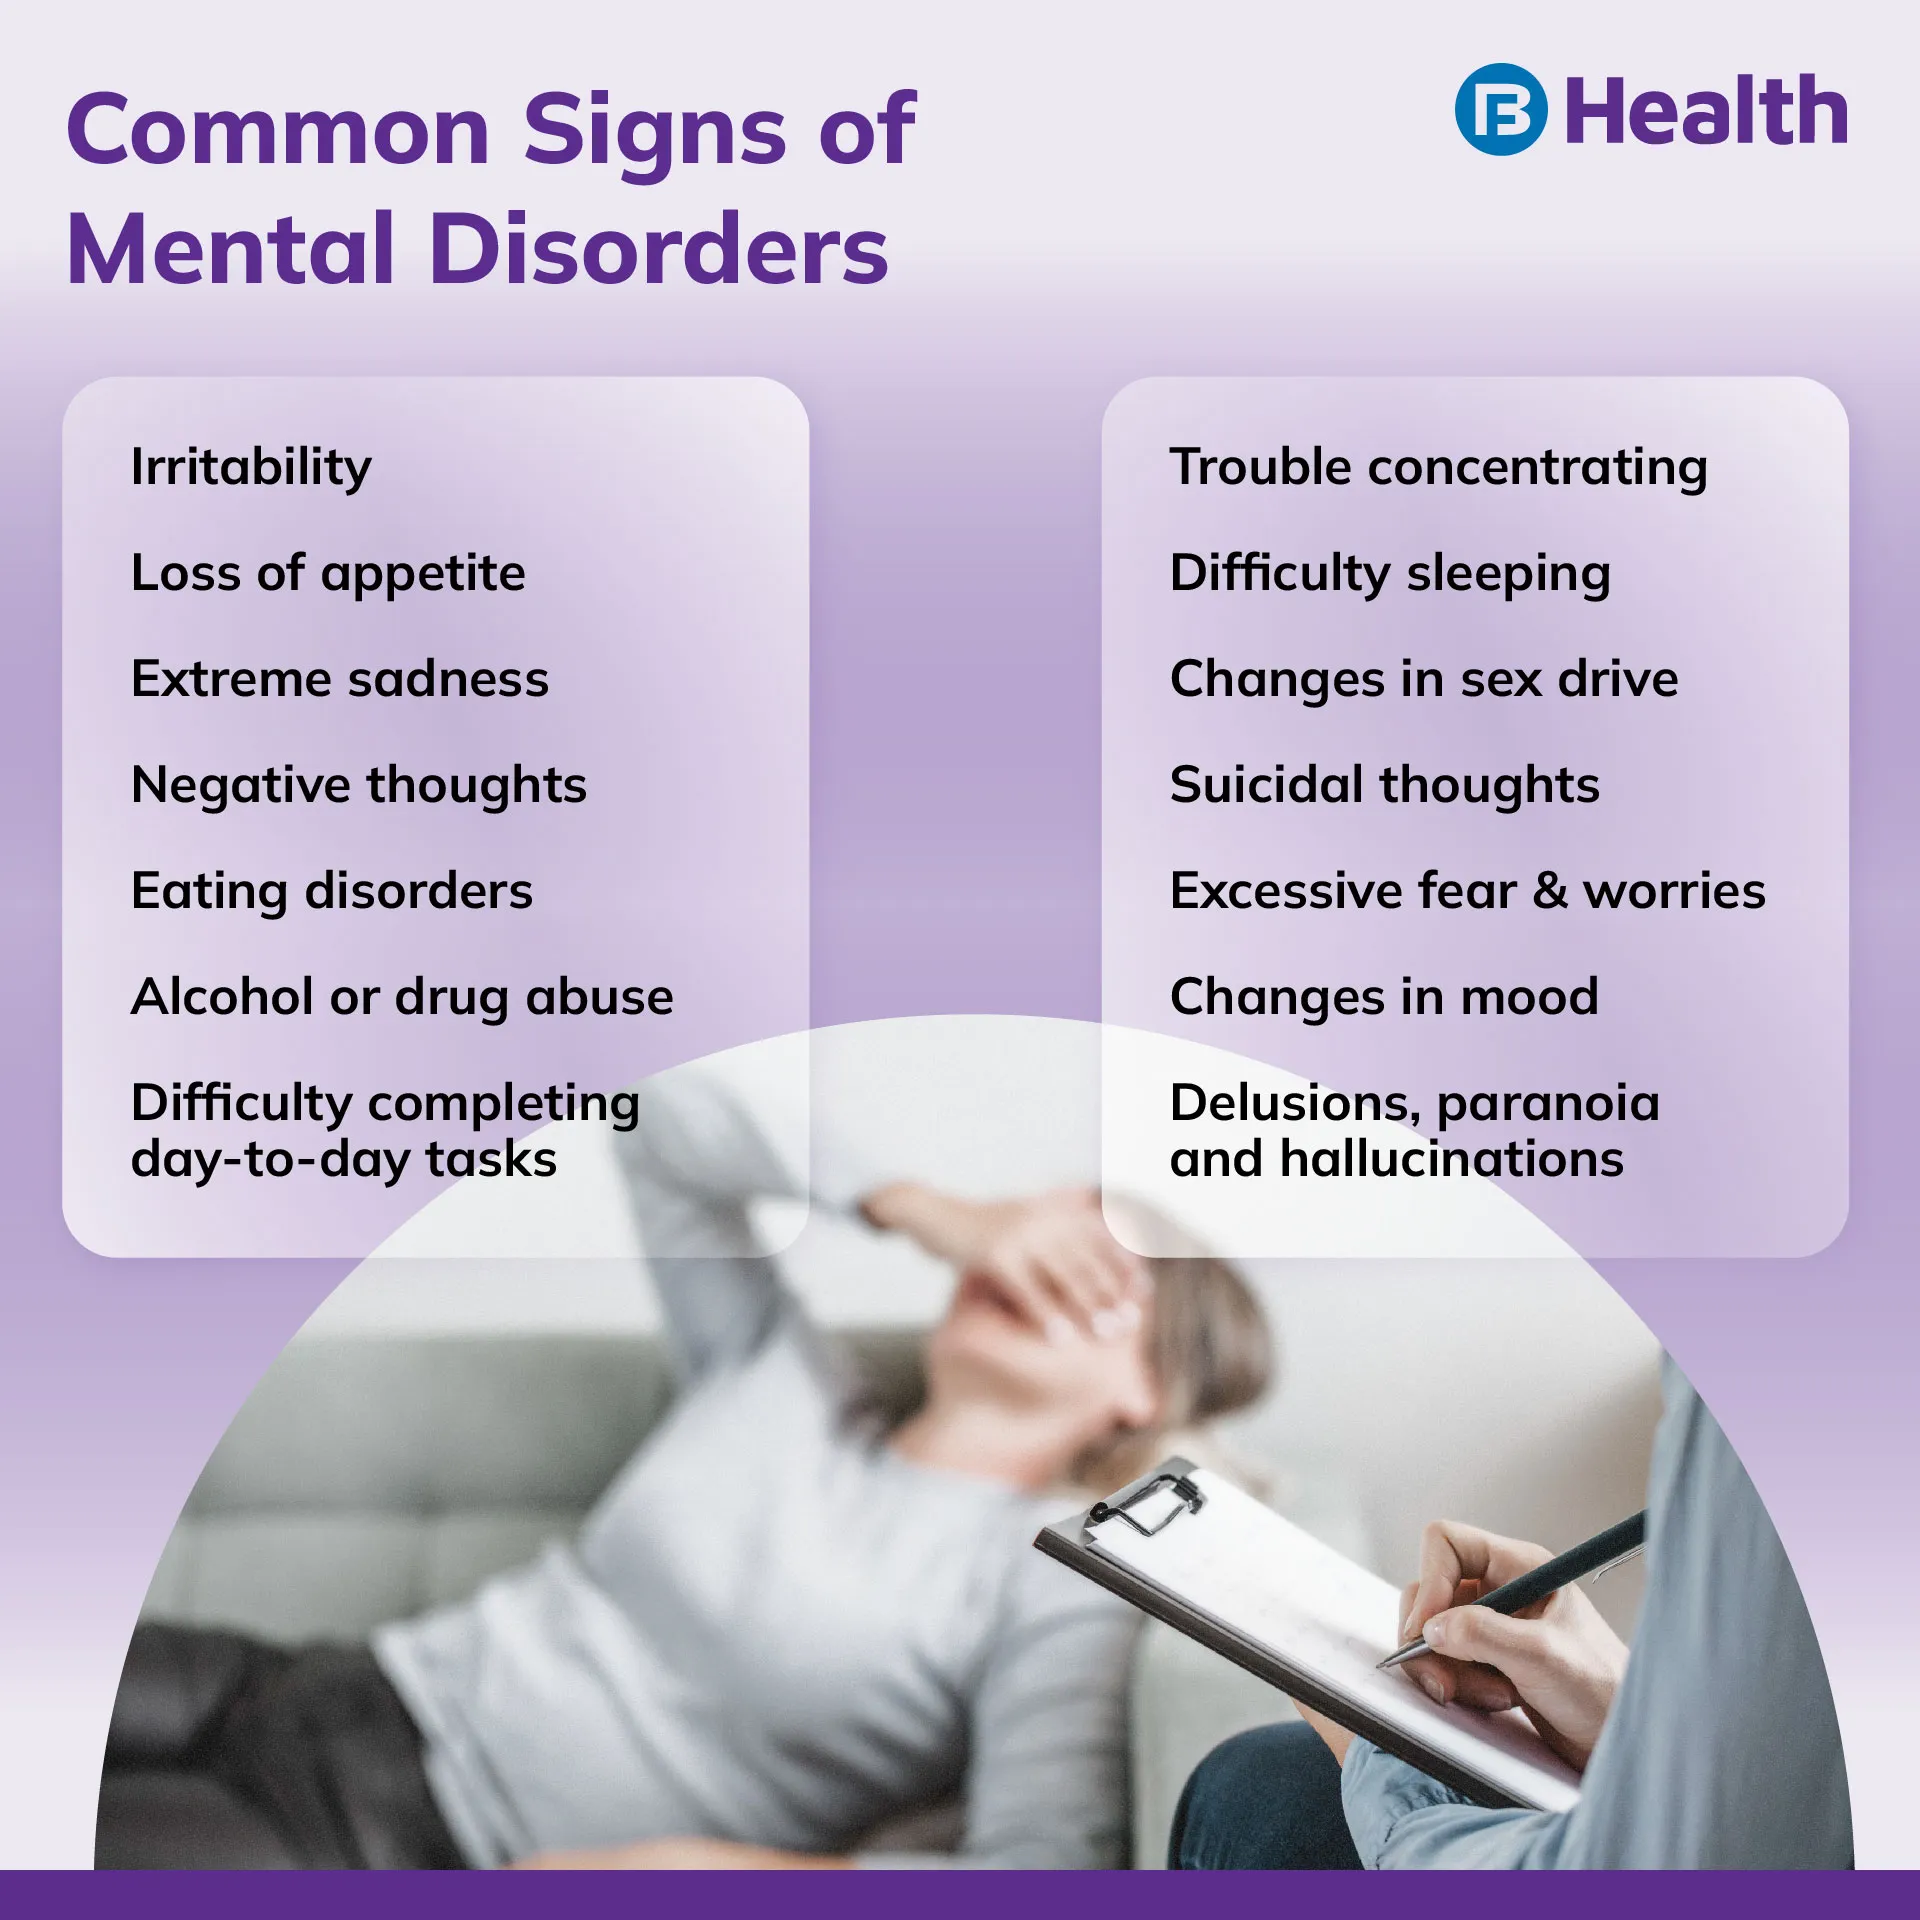 Signs of mental disorders